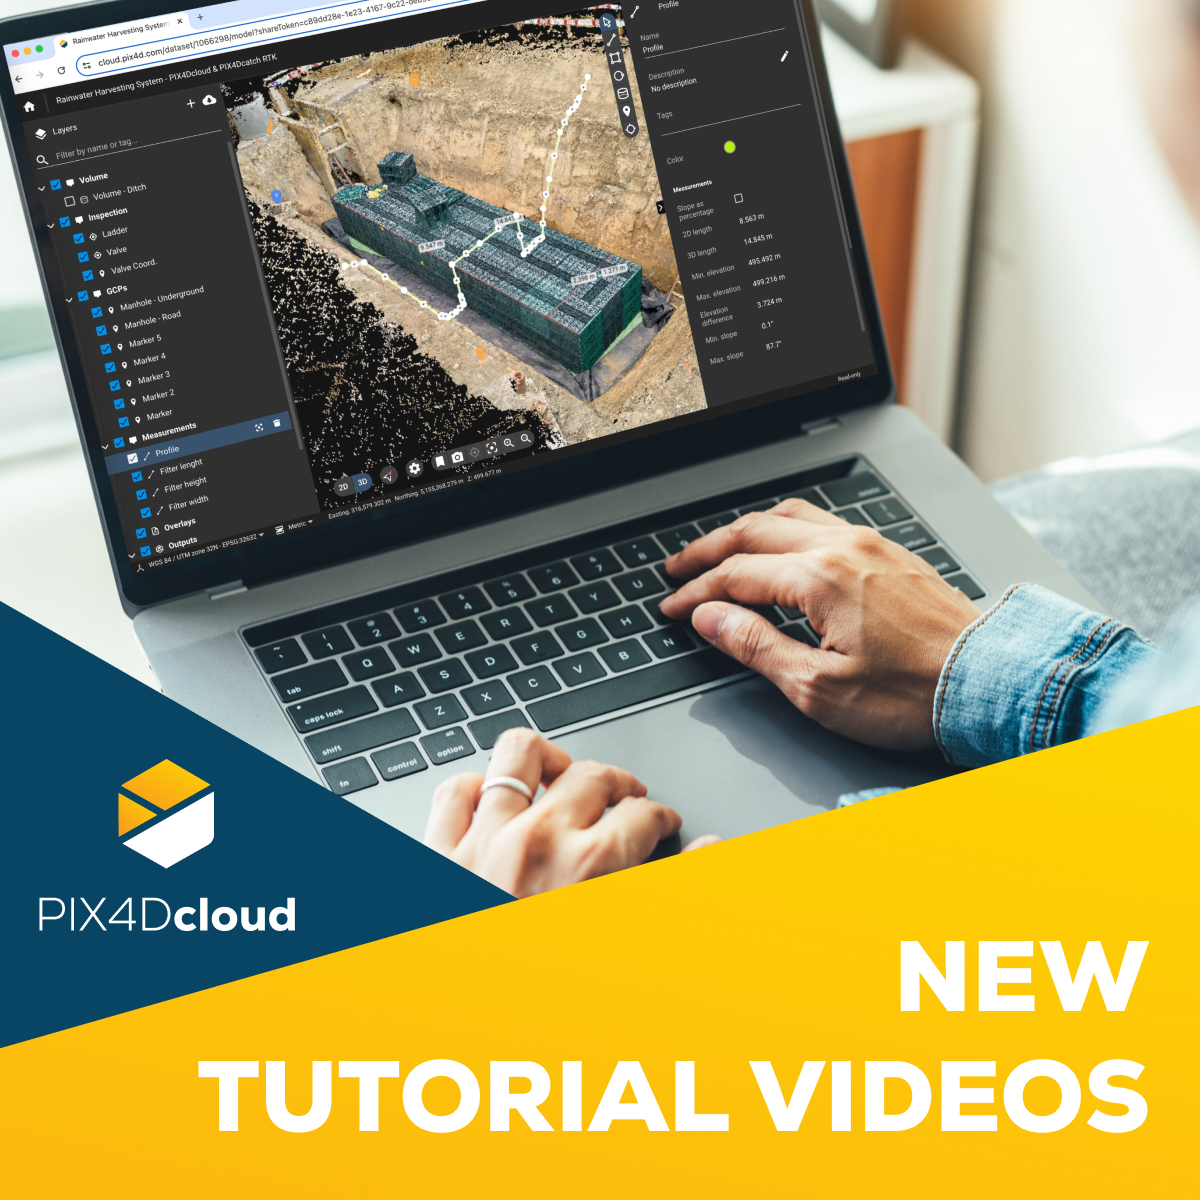 📽️ Dive deeper into #PIX4Dcloud with our new video tutorials! ☁️ Learn how to: ▶️ Compare as-built to design with DXF and IFC files ▶️ Compare data sets ▶️ Generate annotation reports, and more!! Check them out here: hubs.li/Q02t7Mk-0 #DXF #IFC #construction #Pix4D